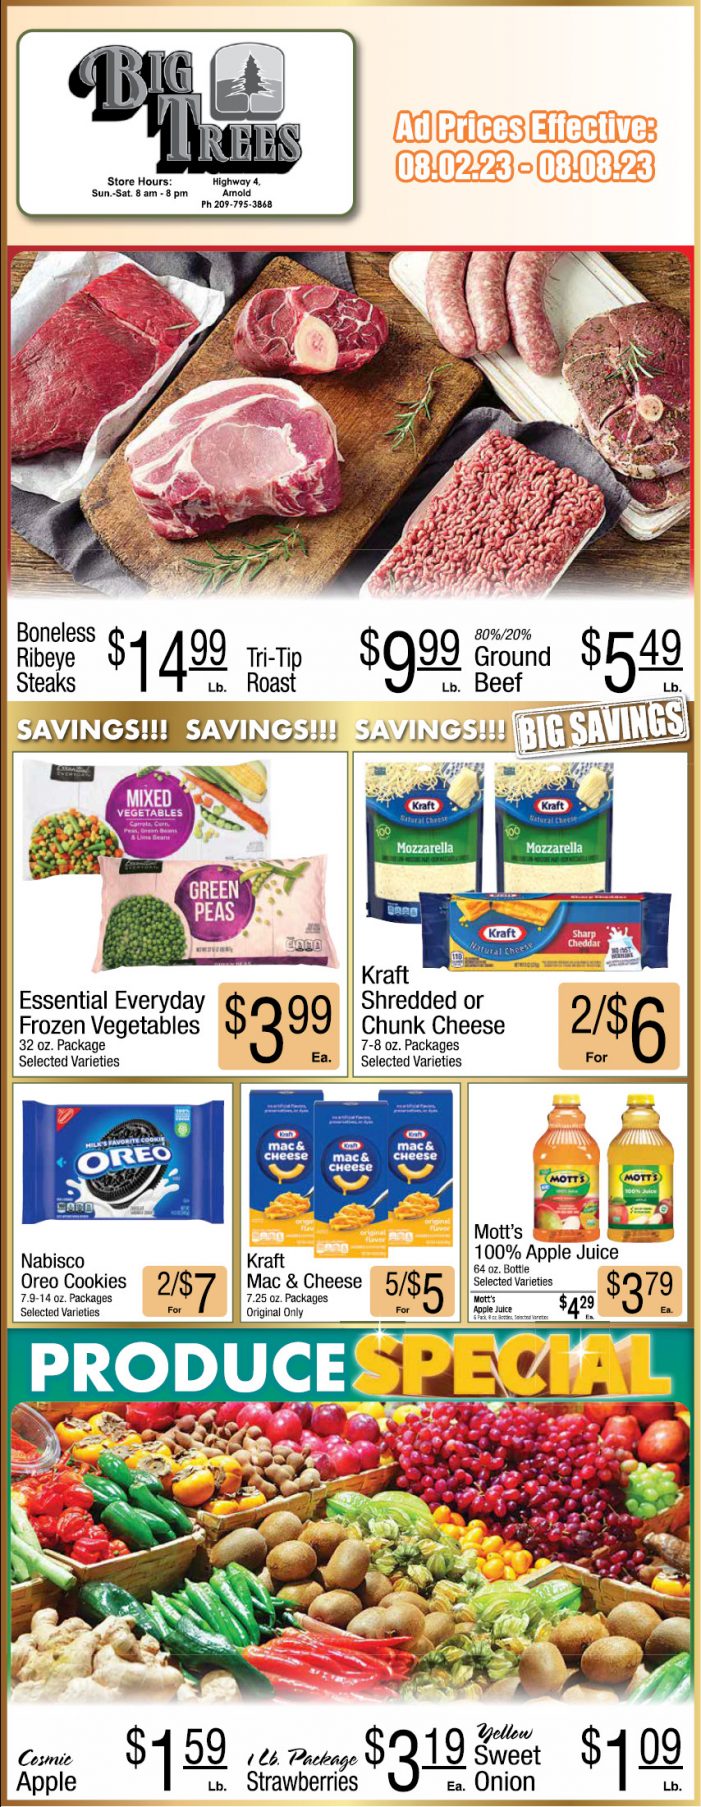 Big Trees Market Weekly Ad, Grocery, Produce, Meat & Deli Specials Through August 8th!  Shop Local & Save!